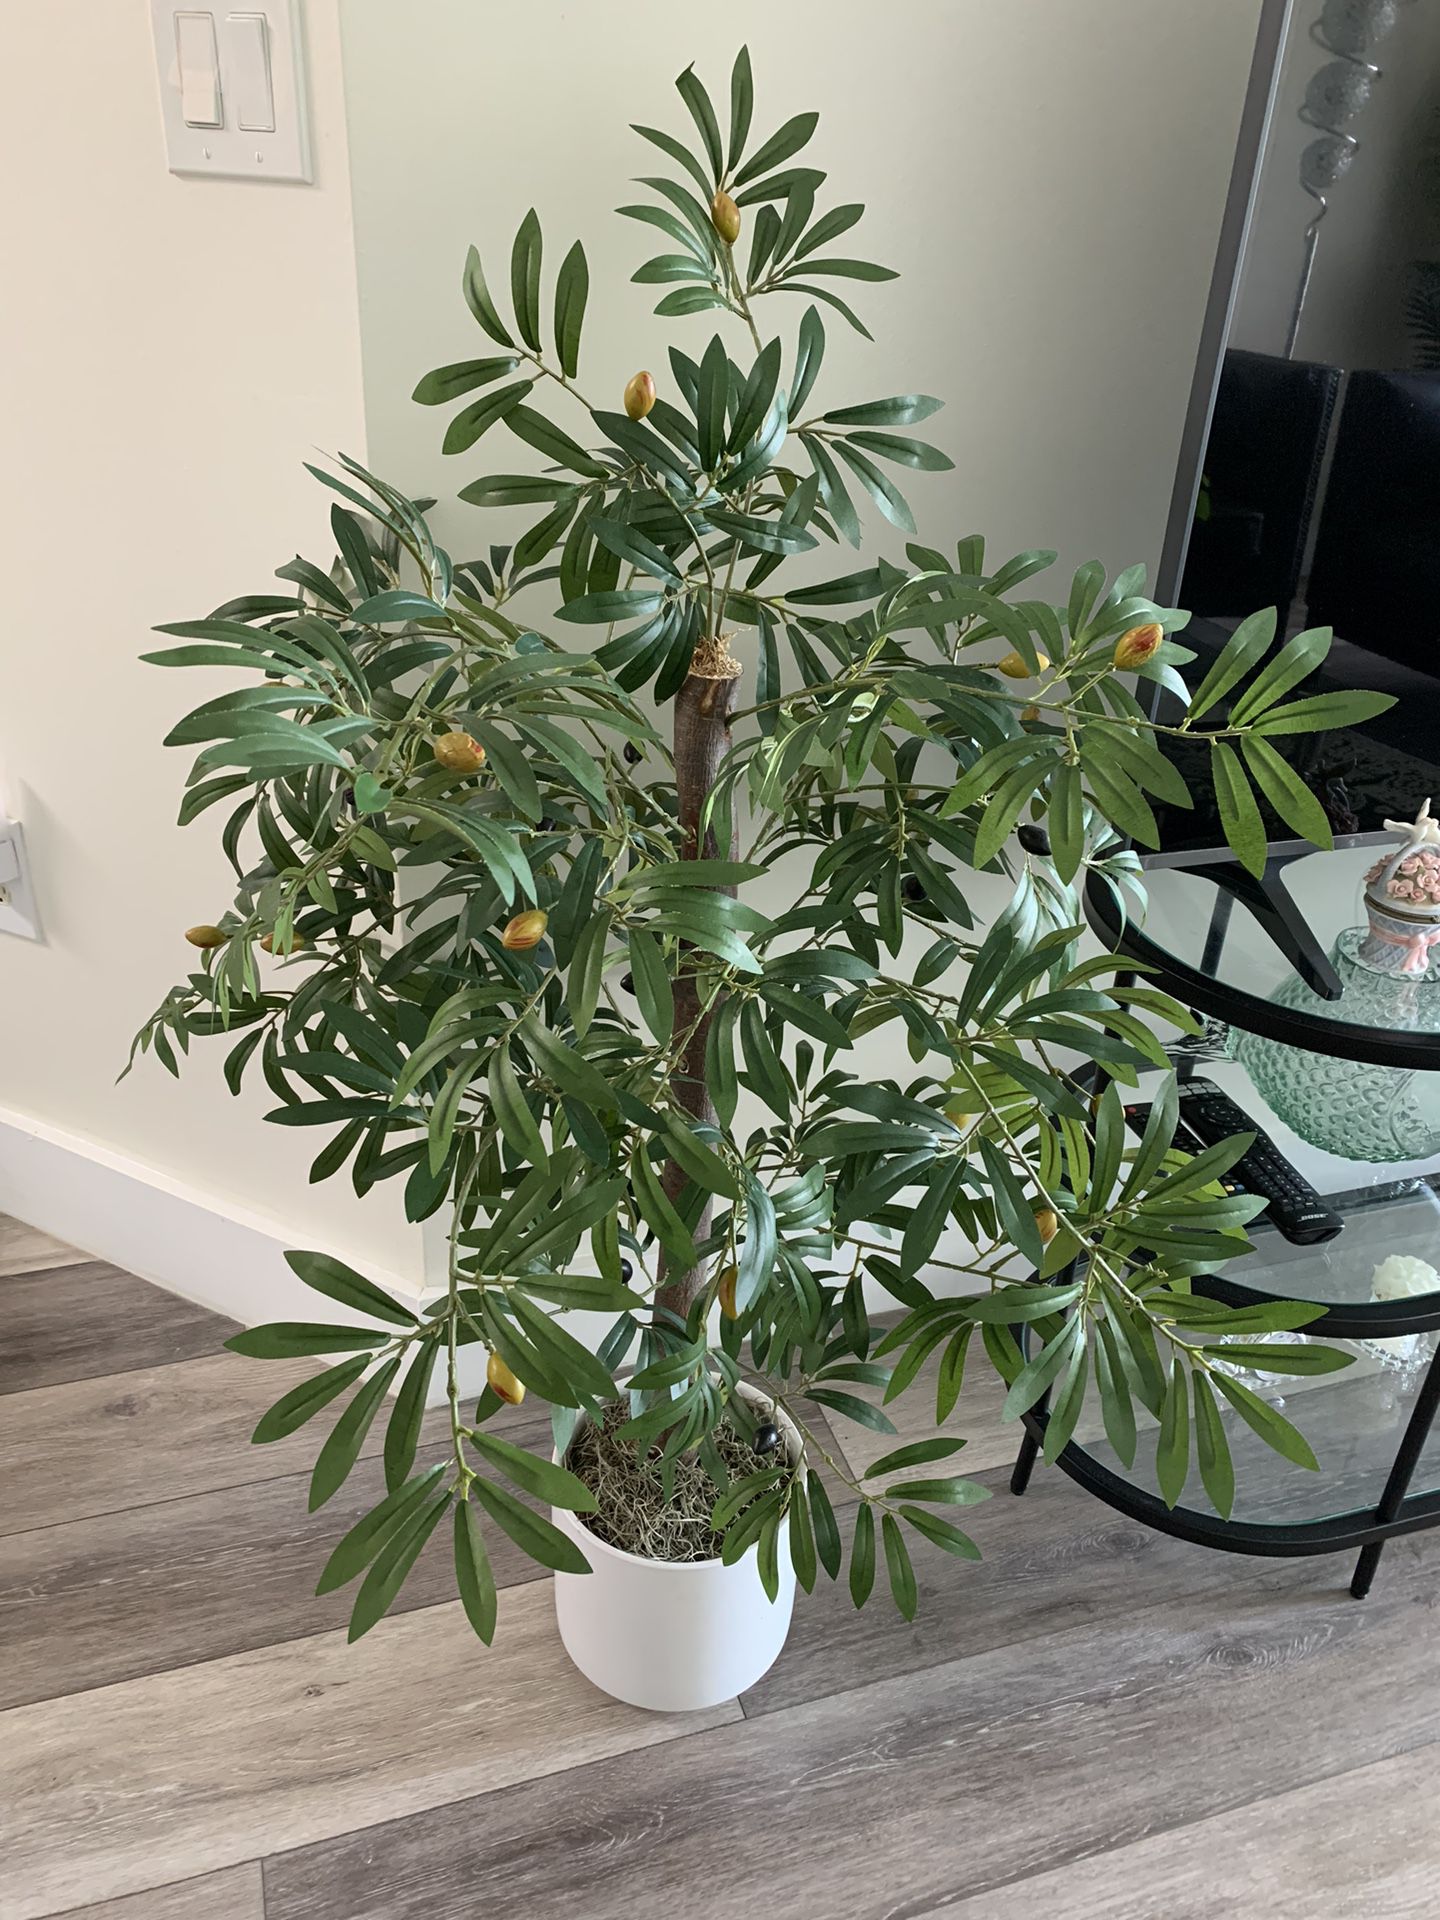 Artificial Olive Plant With White Pot Realistic Fruit And Bunches